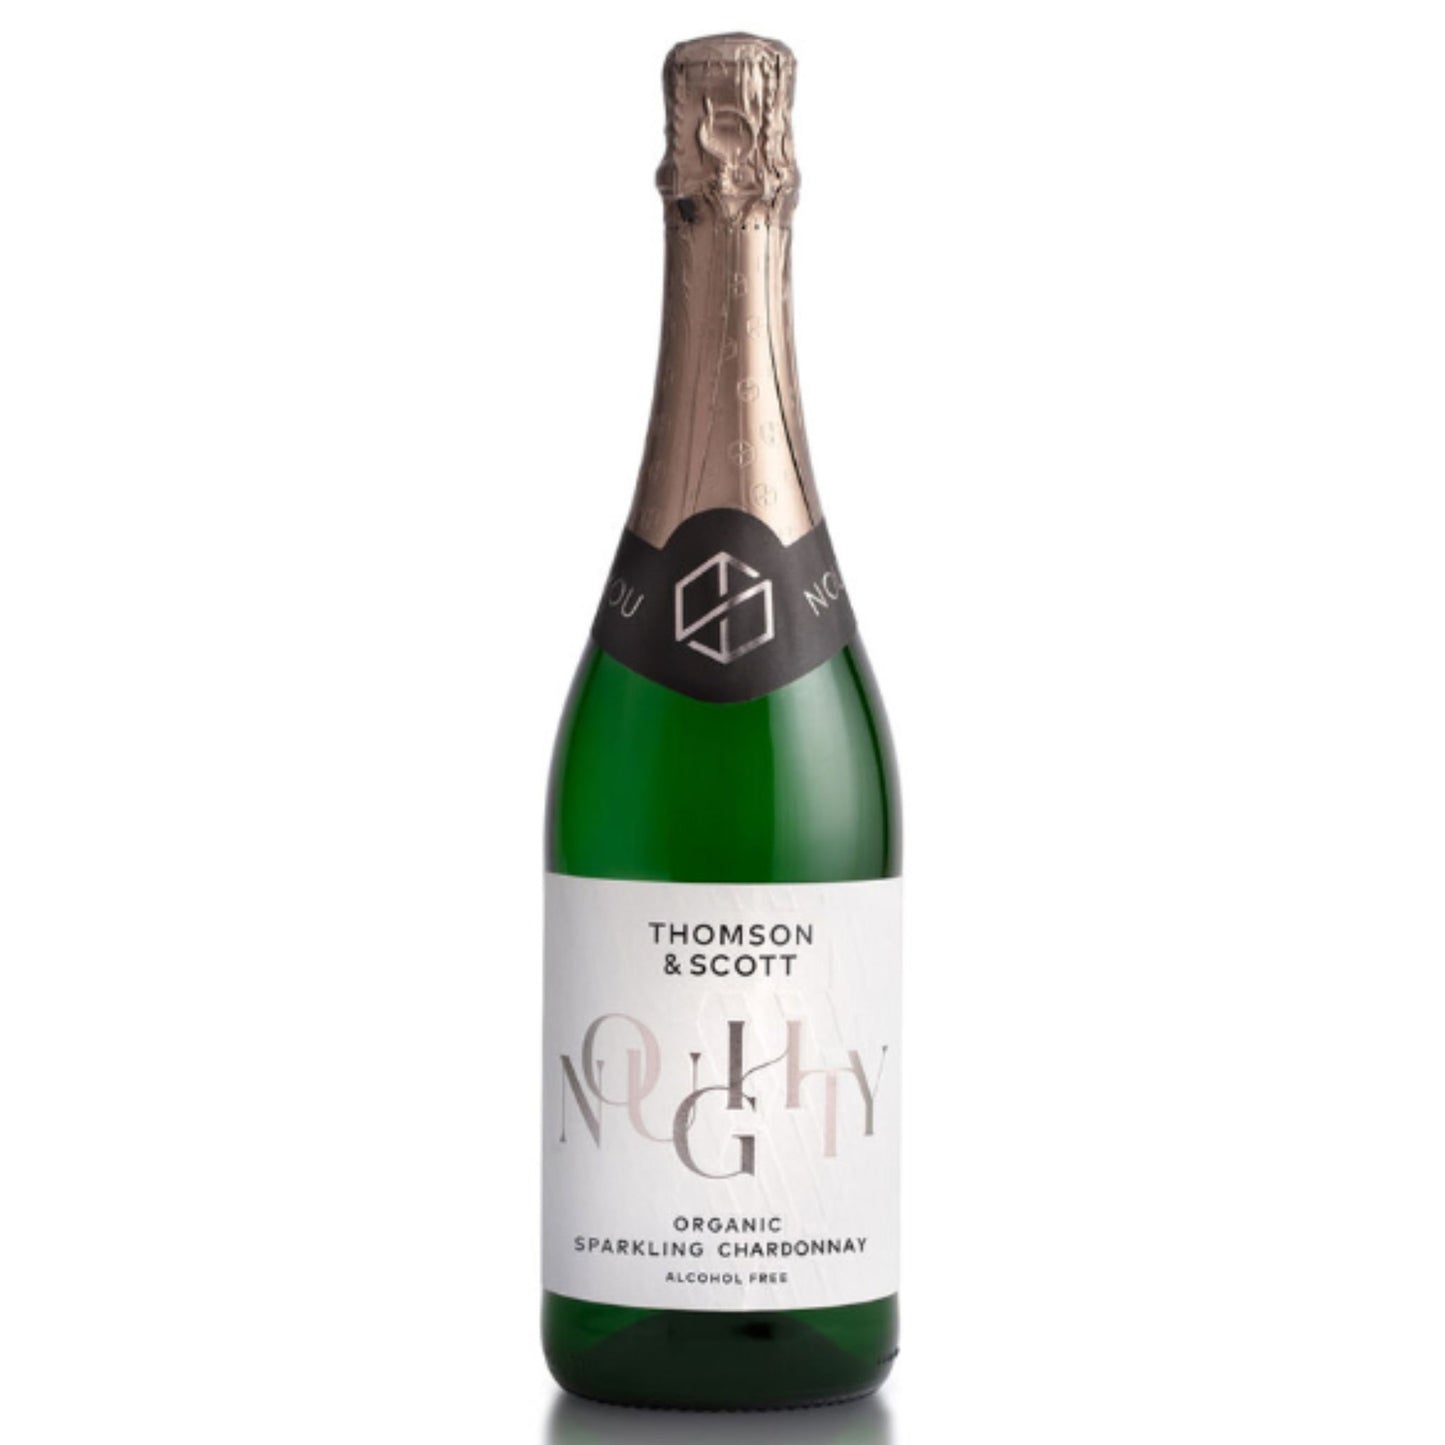 Noughty Sparkling Chardonnay non-alcoholic wine is available at Knyota Drinks in Ottawa.